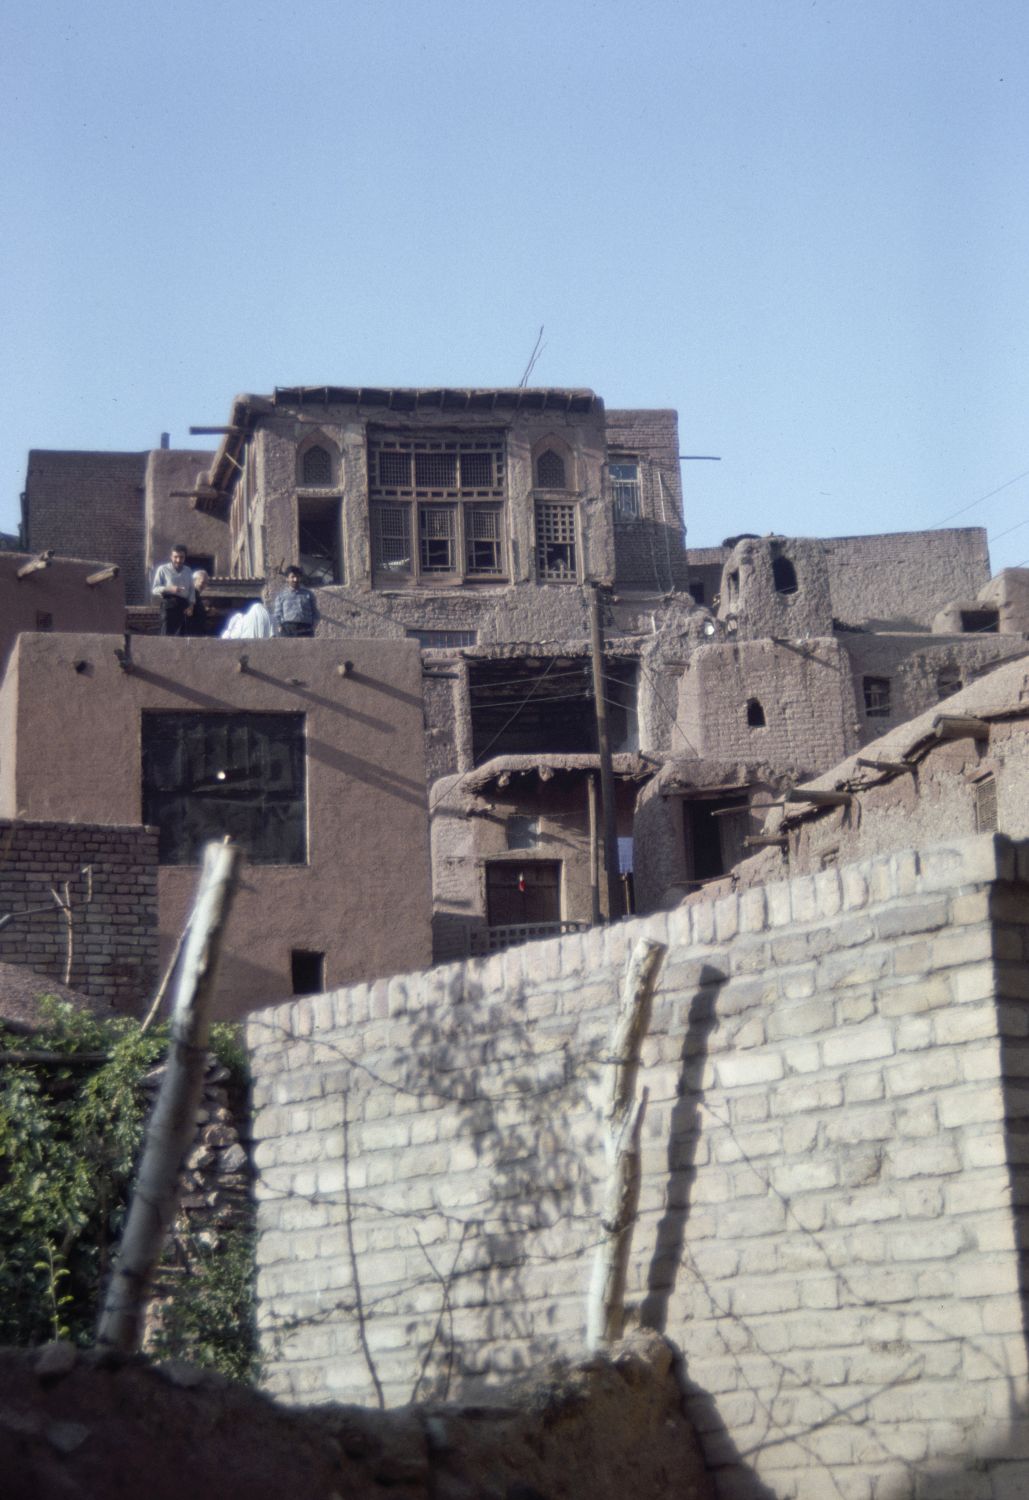 Abyanah  - View of houses in the village of Abyanah, Iran.